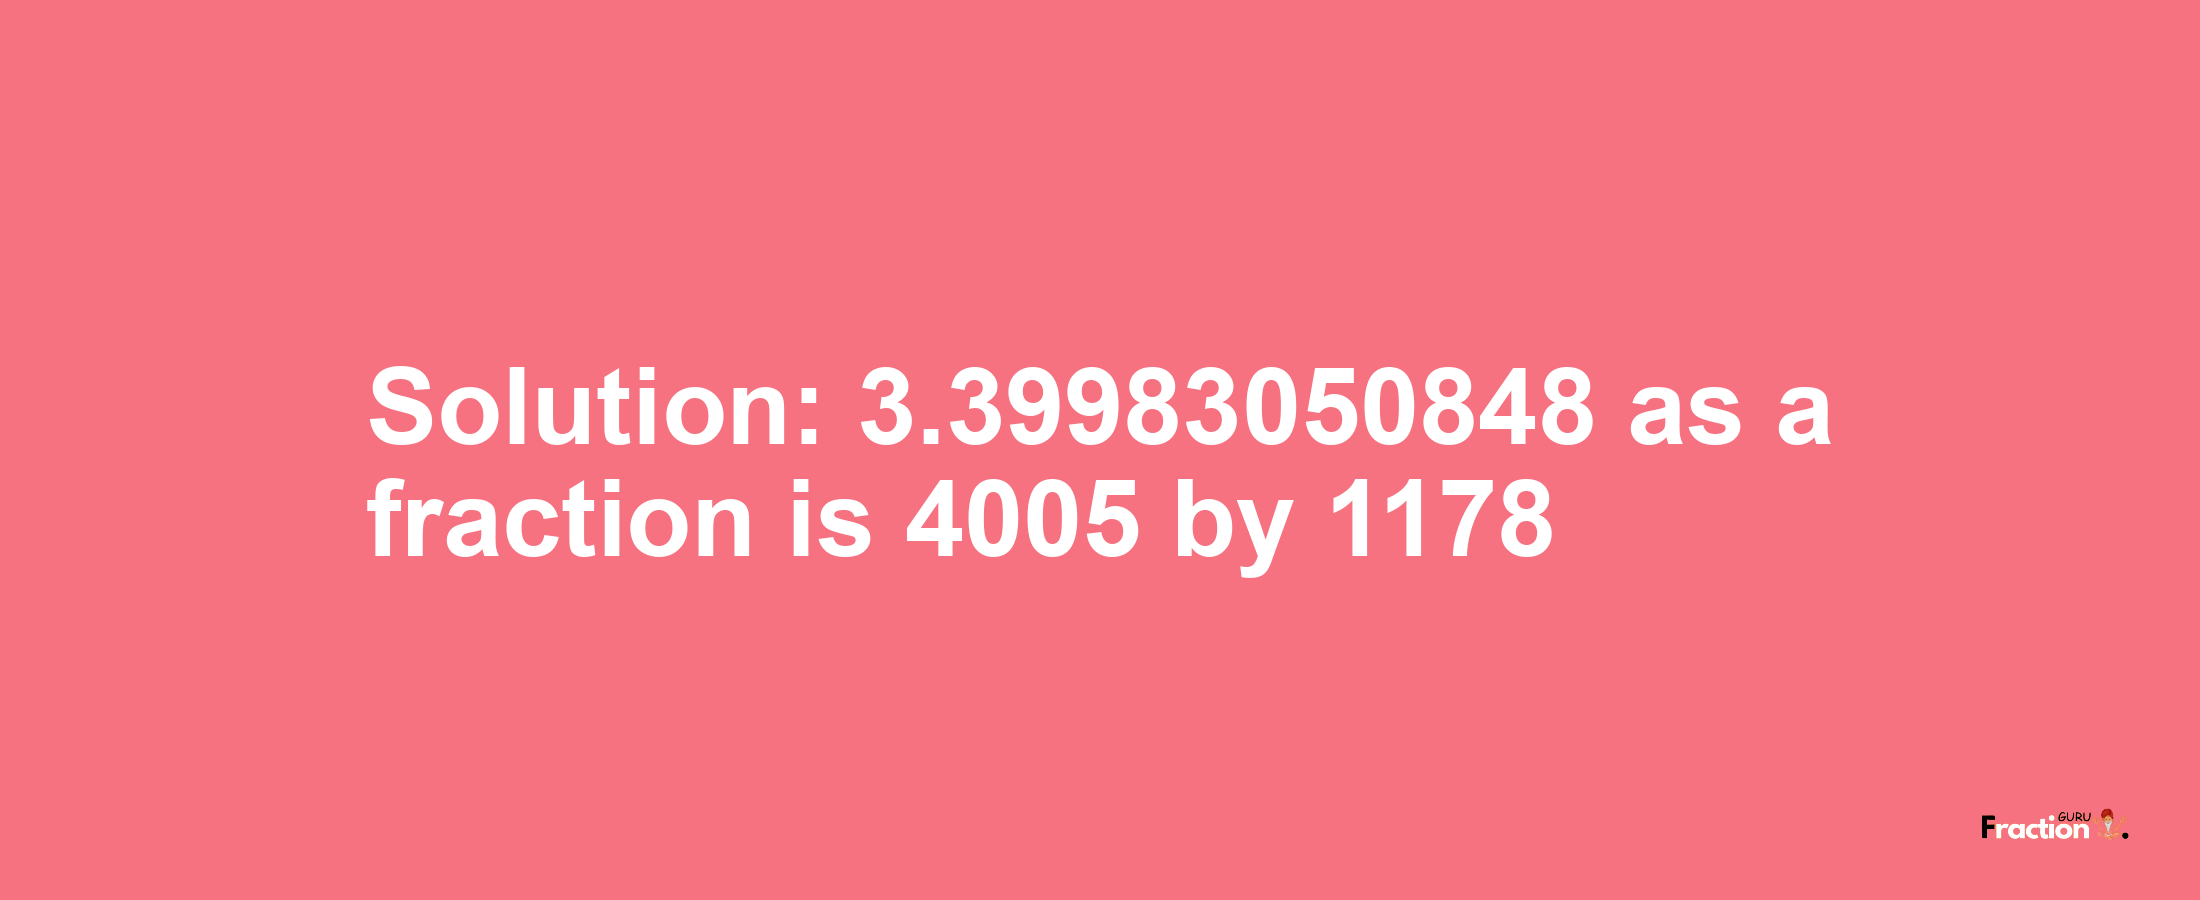 Solution:3.39983050848 as a fraction is 4005/1178